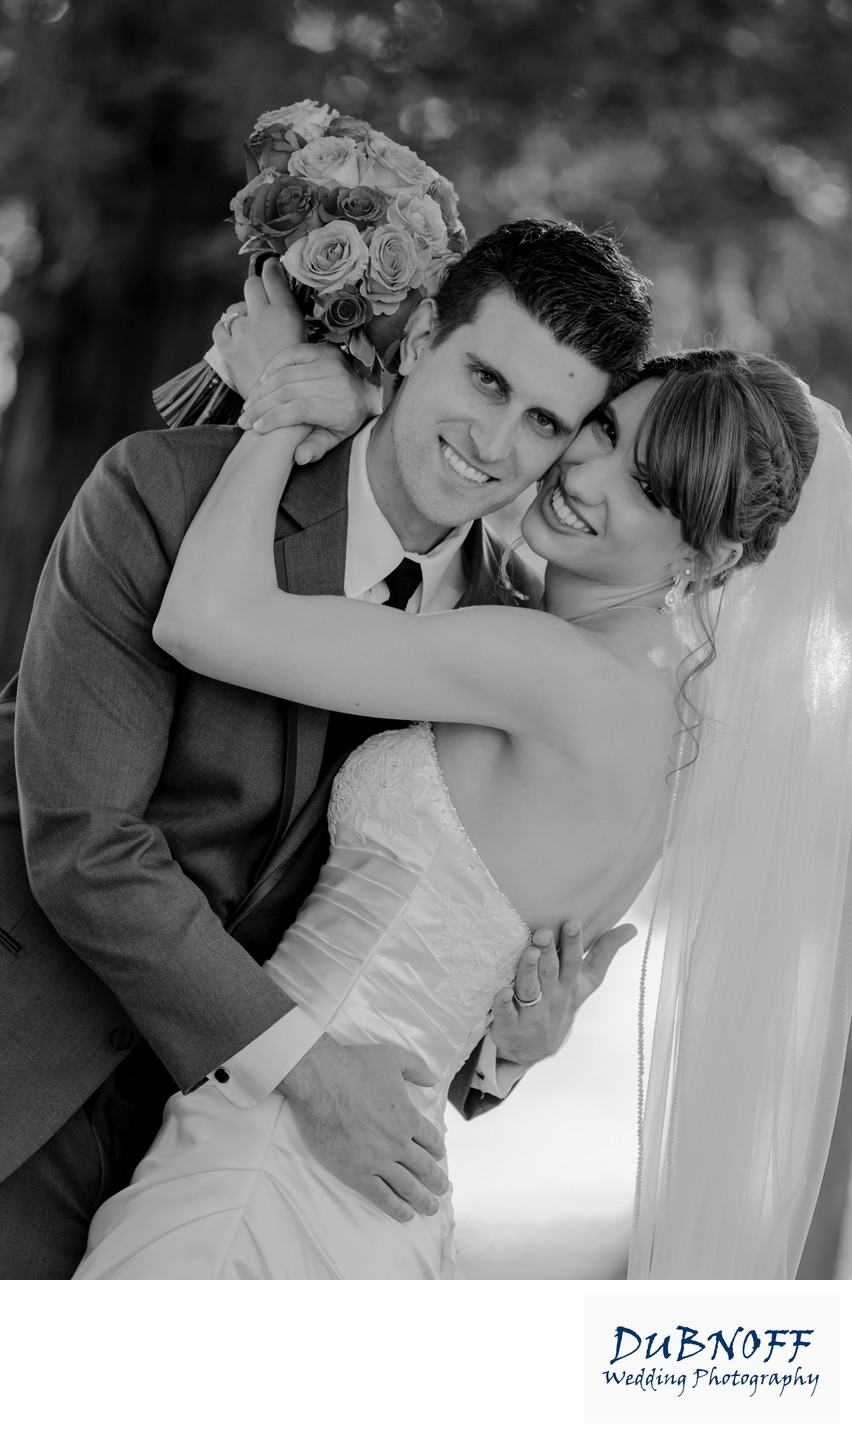 bride and groom bouquet black and white wedding photo